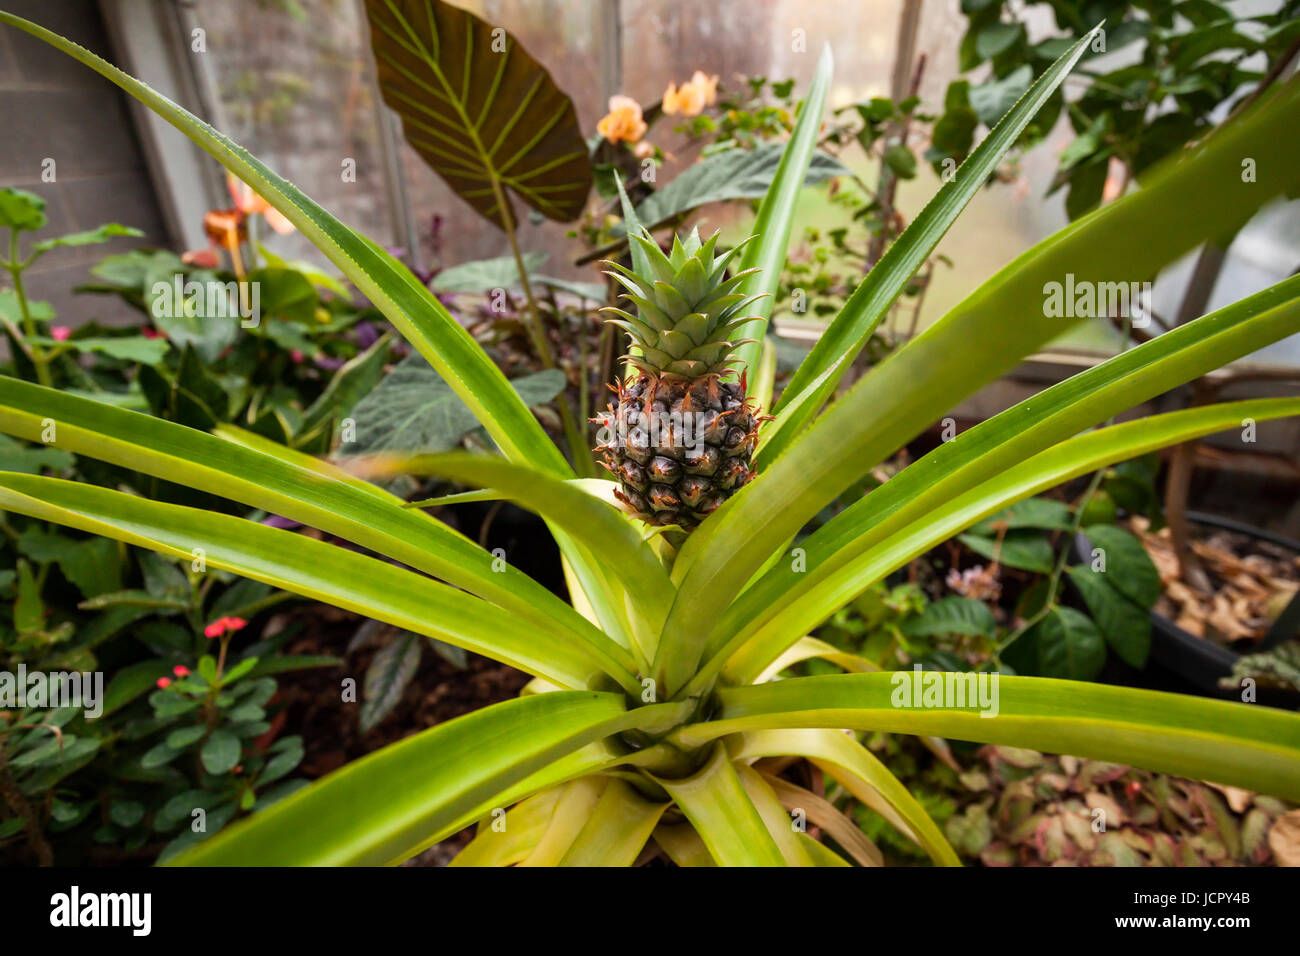 A pineapple plant or ananas comosus in the fruiting stage with a small pineapple growing. McMaster Biology Greenhouse, Hamilton, Ontario, Canada. Stock Photo